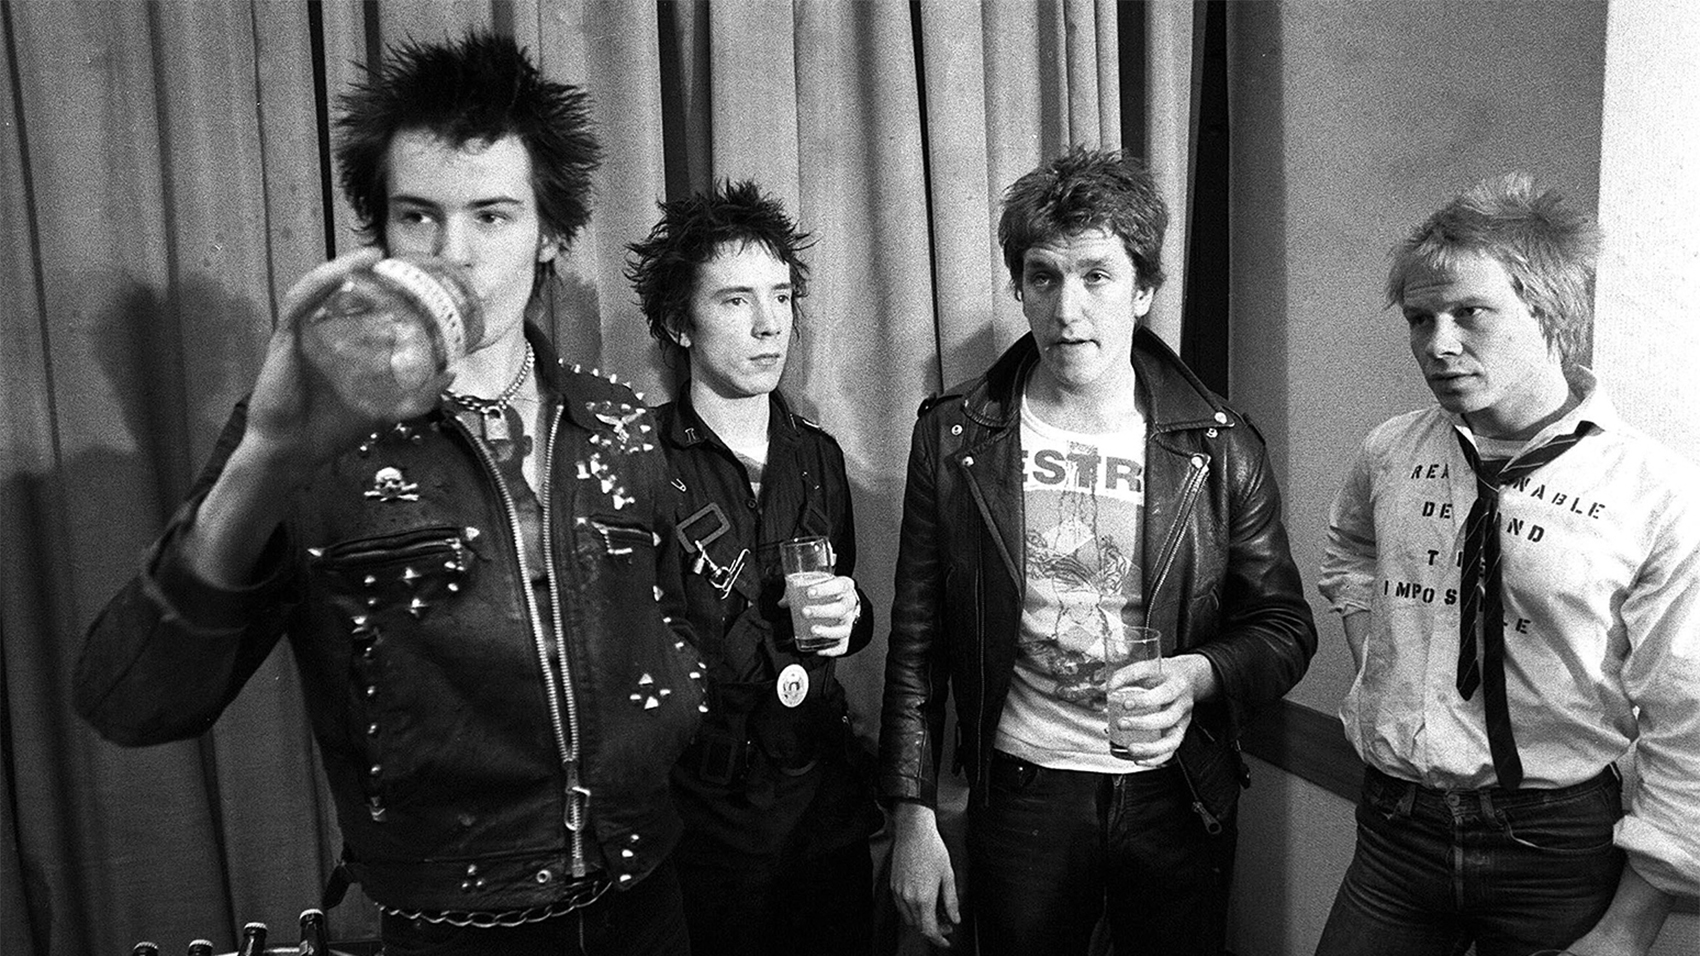 41 Years Ago The Sex Pistols “god Save The Queen” Was Banned From The Bbc For “gross Bad Taste